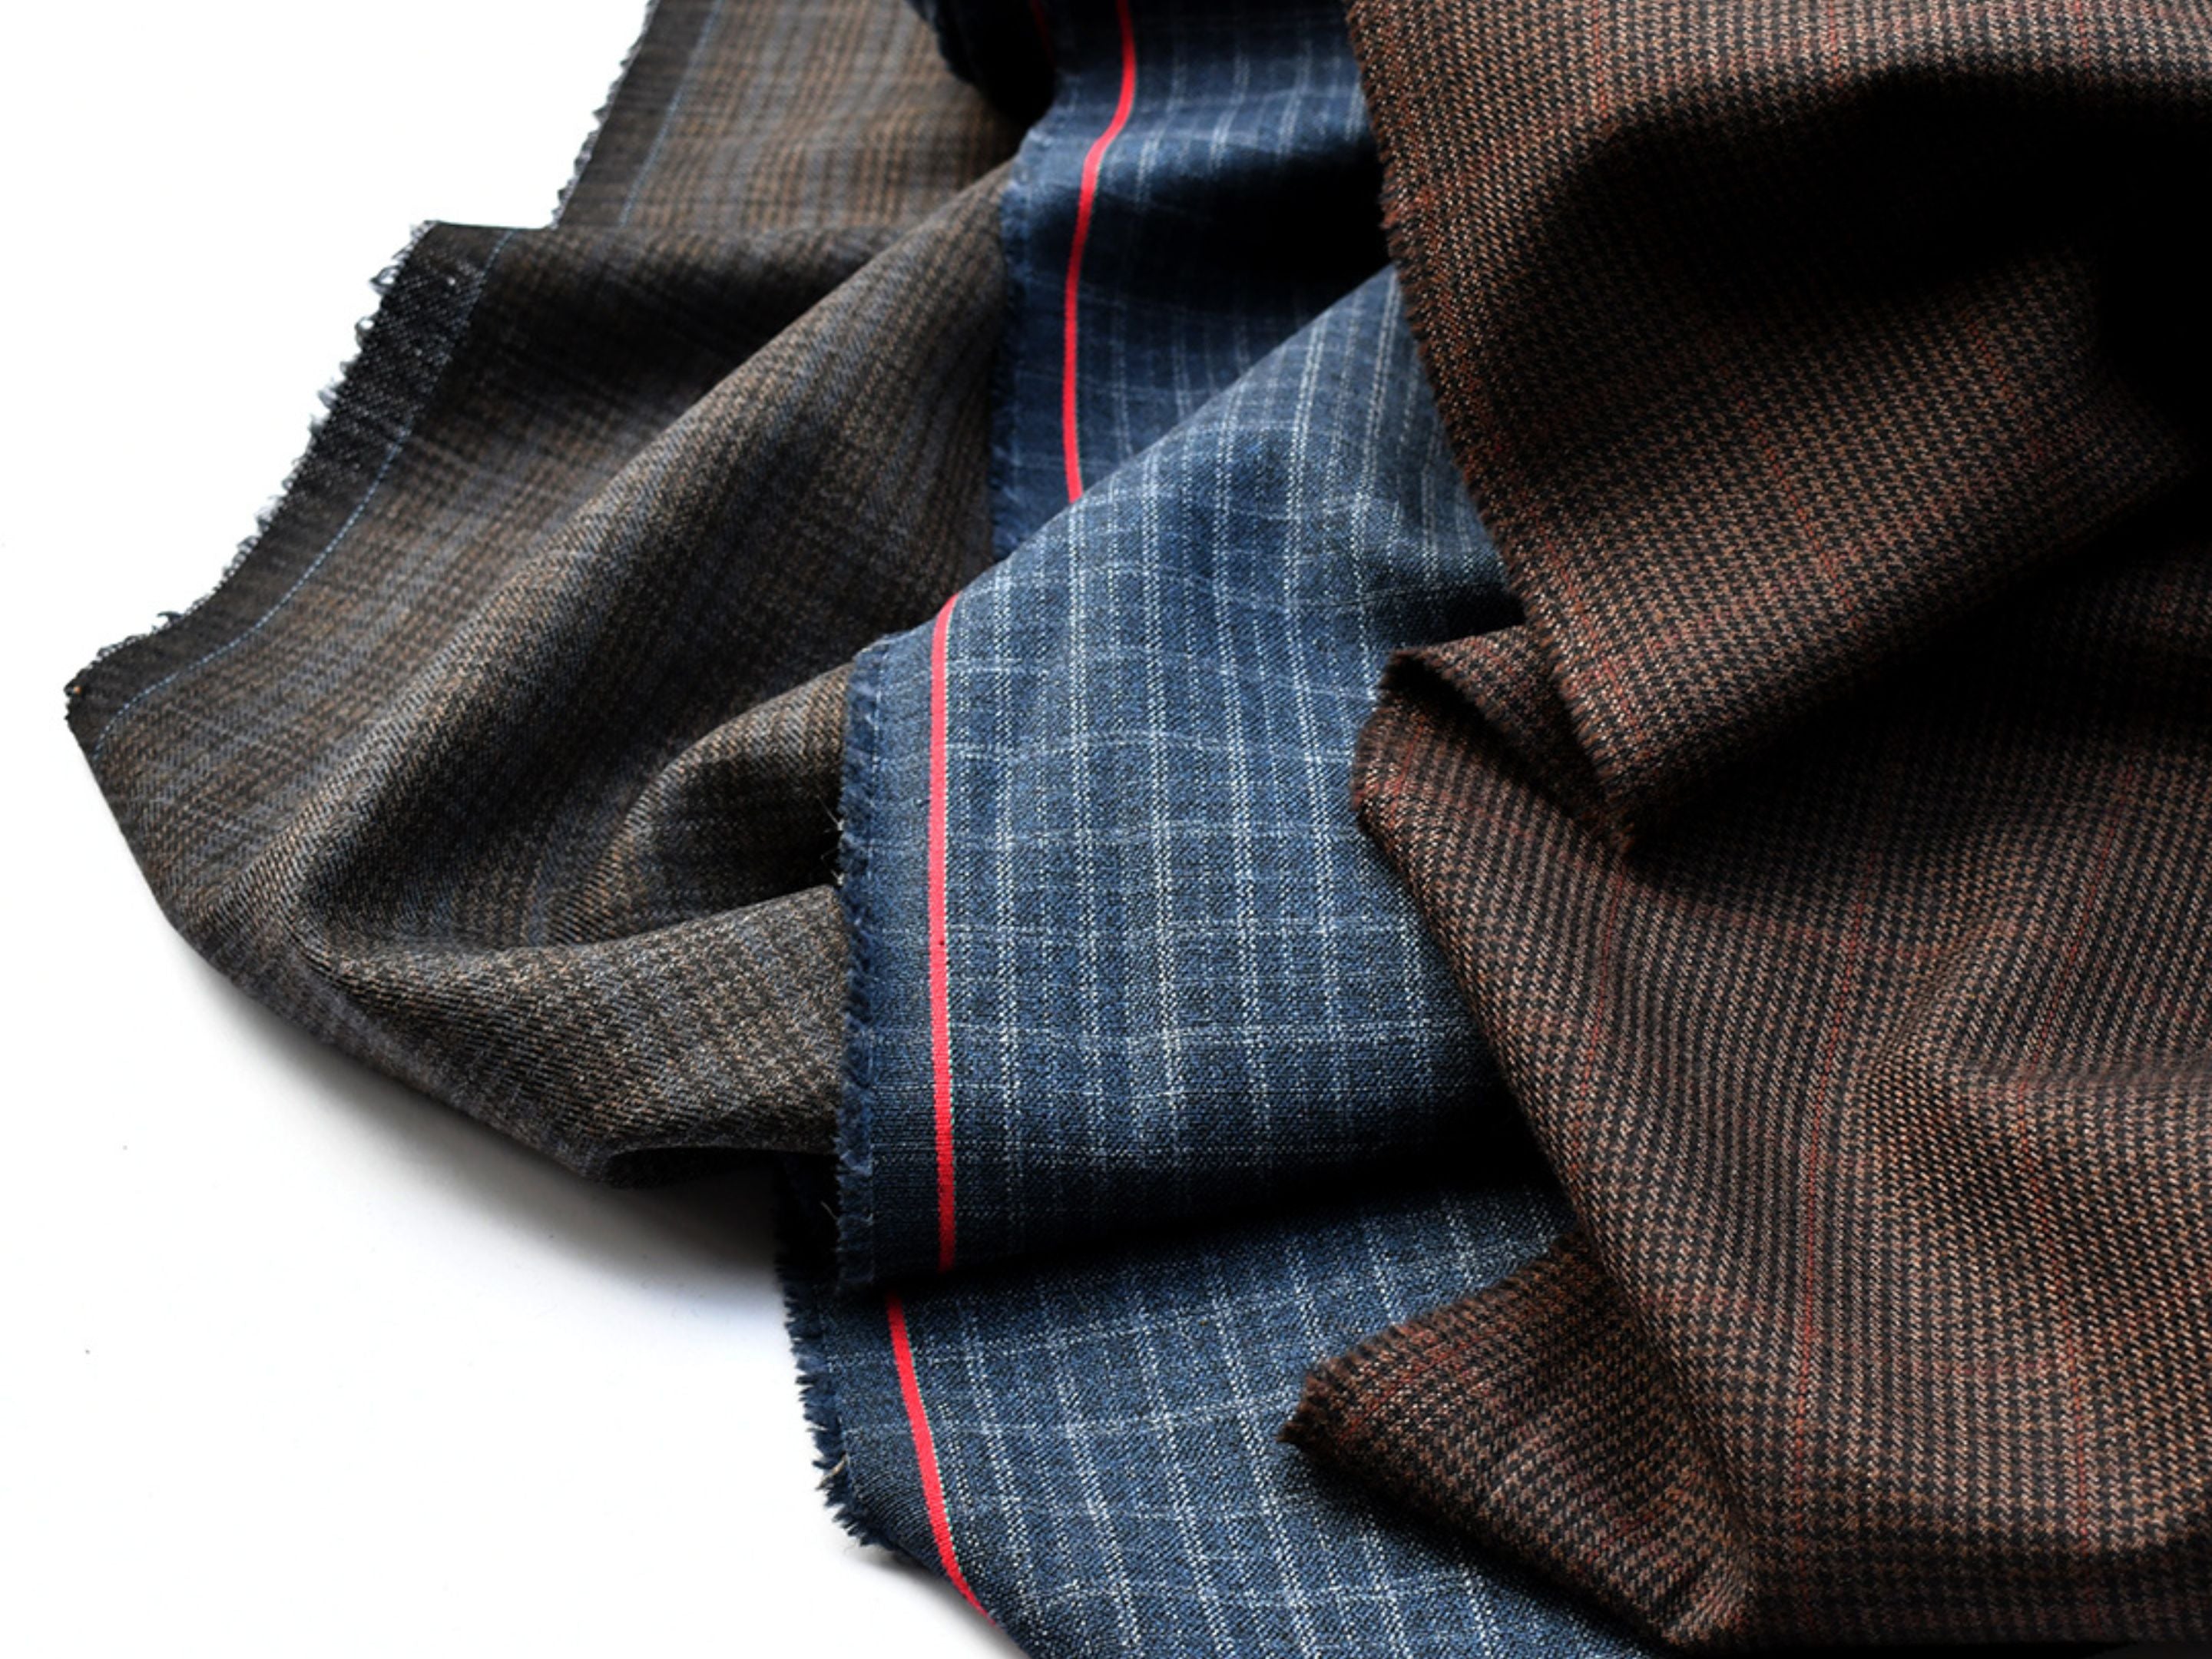 Wool suiting fabrics draped together